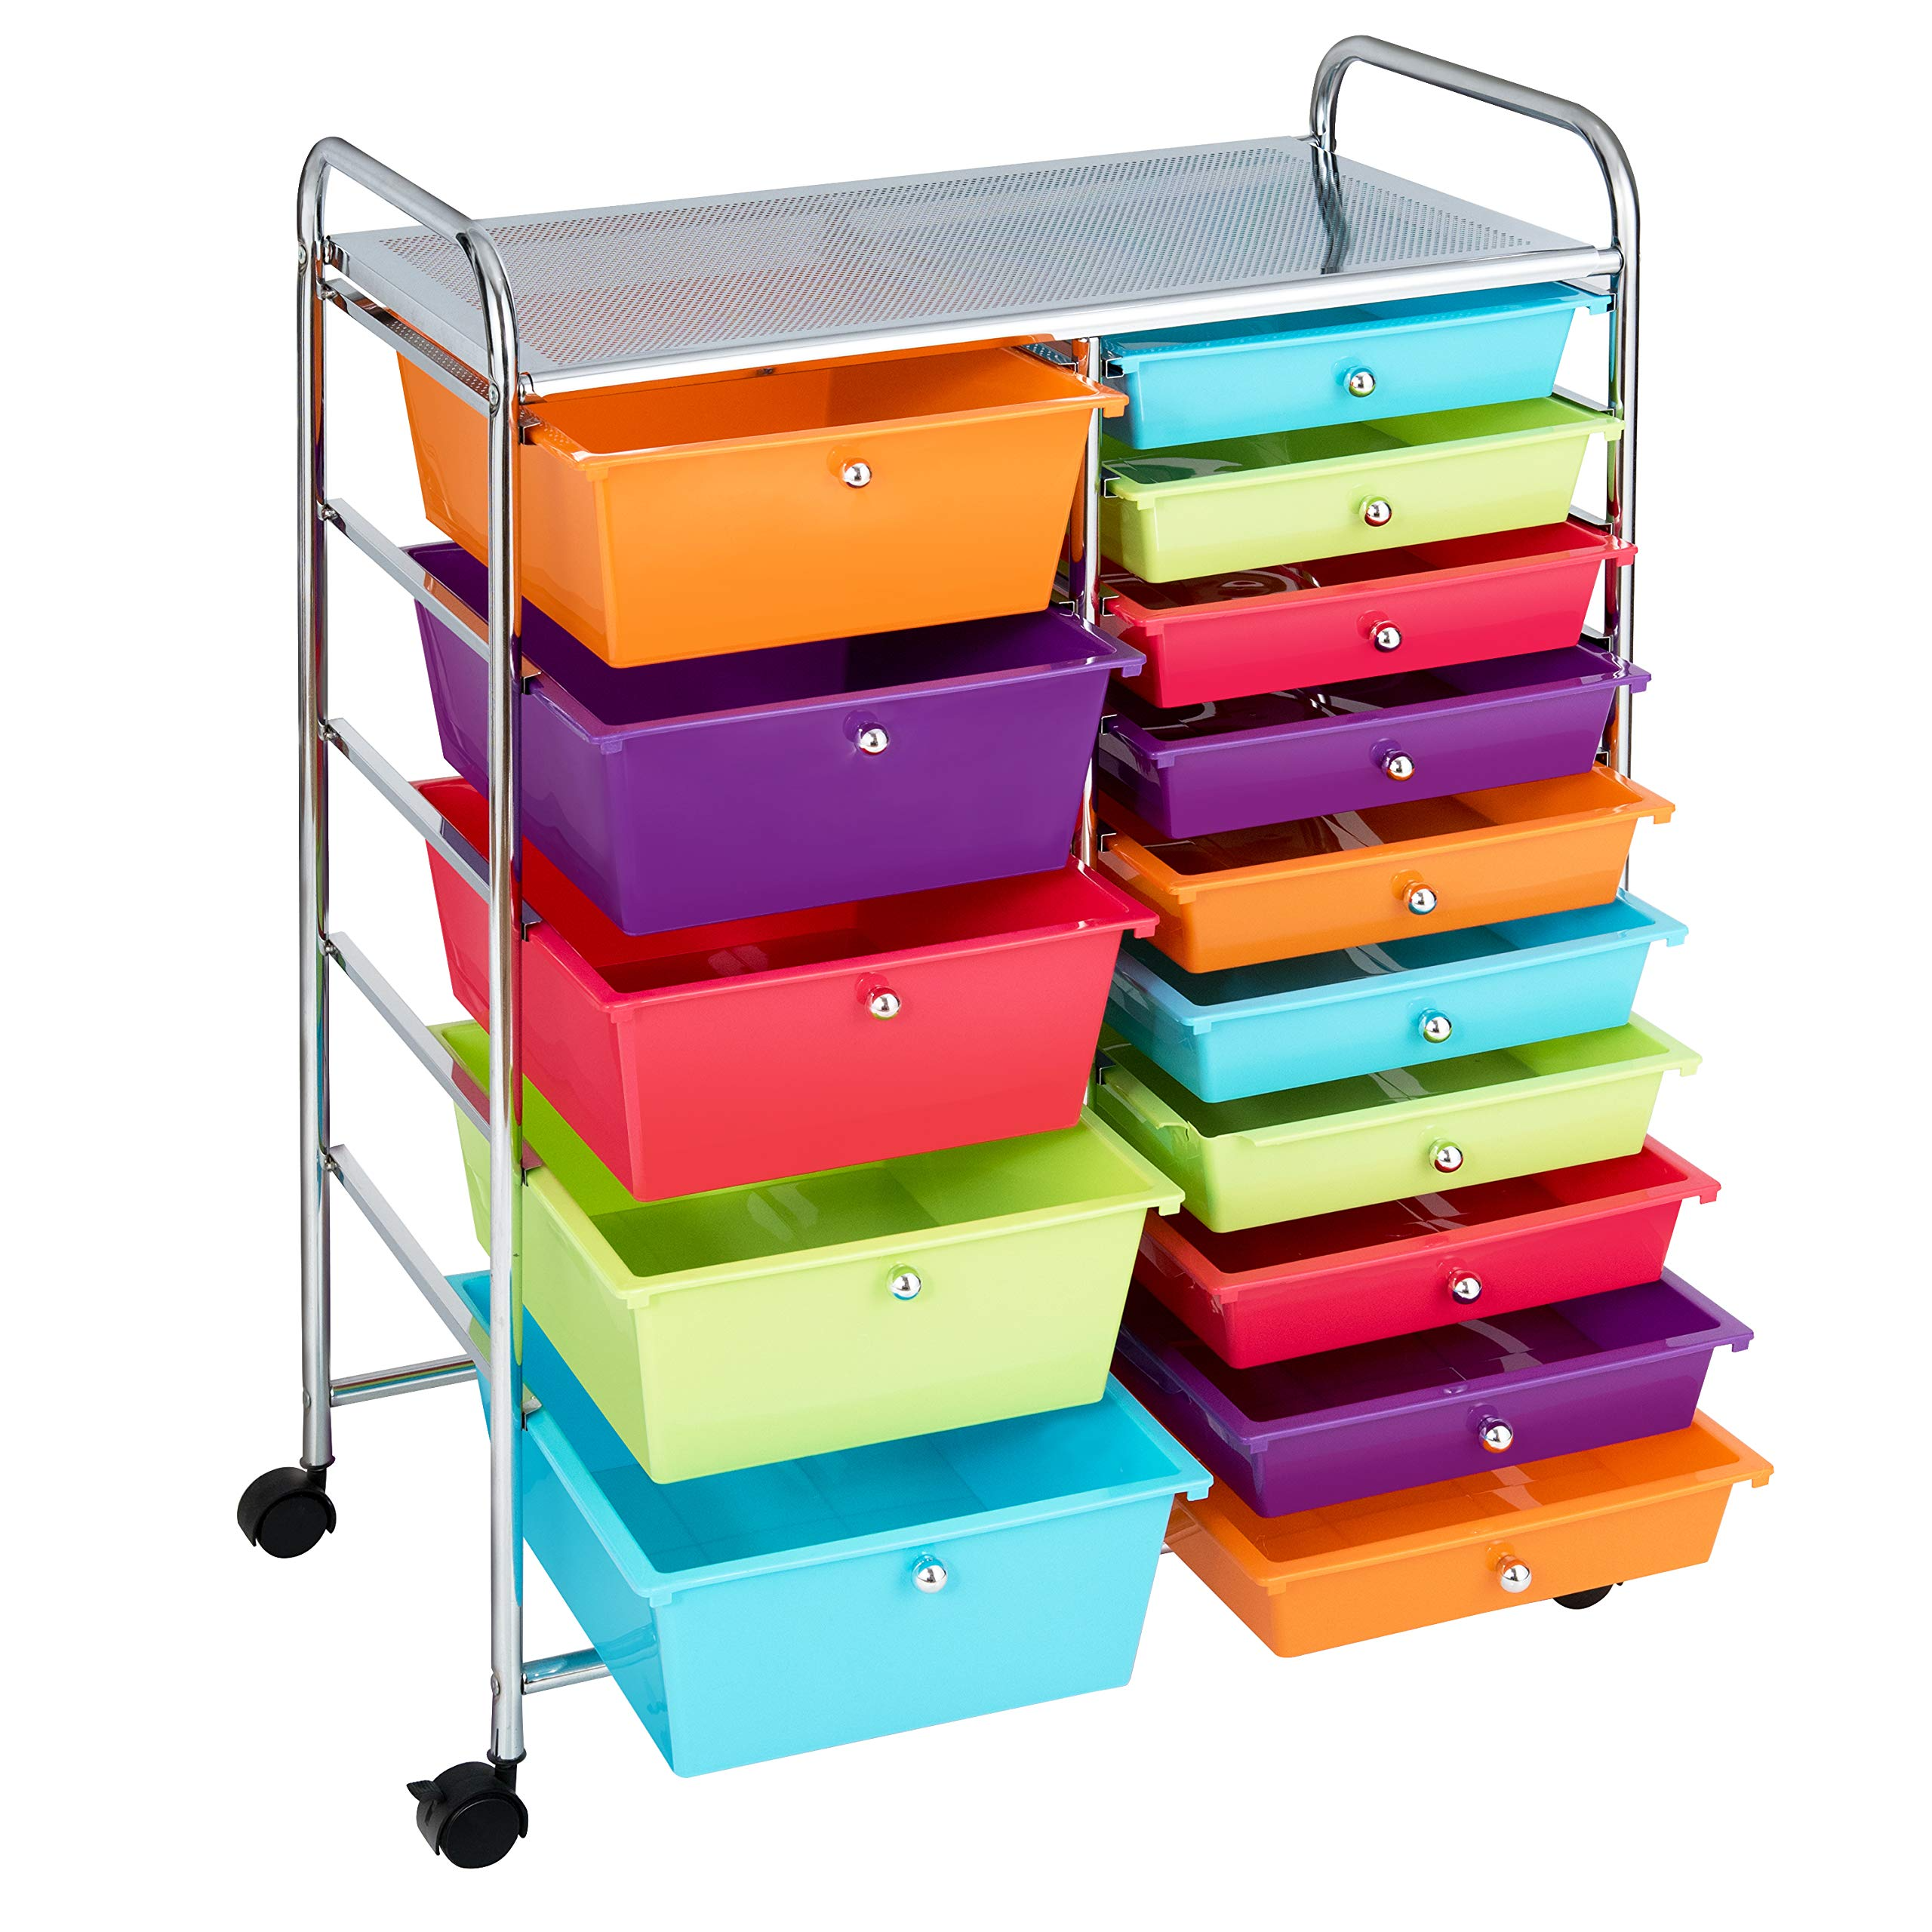 Giantex 9-Bin Rolling Storage Cart and Organizer with Drawer Kids Toy  Storage Box Playroom Bedroom Shelf, with Wheels